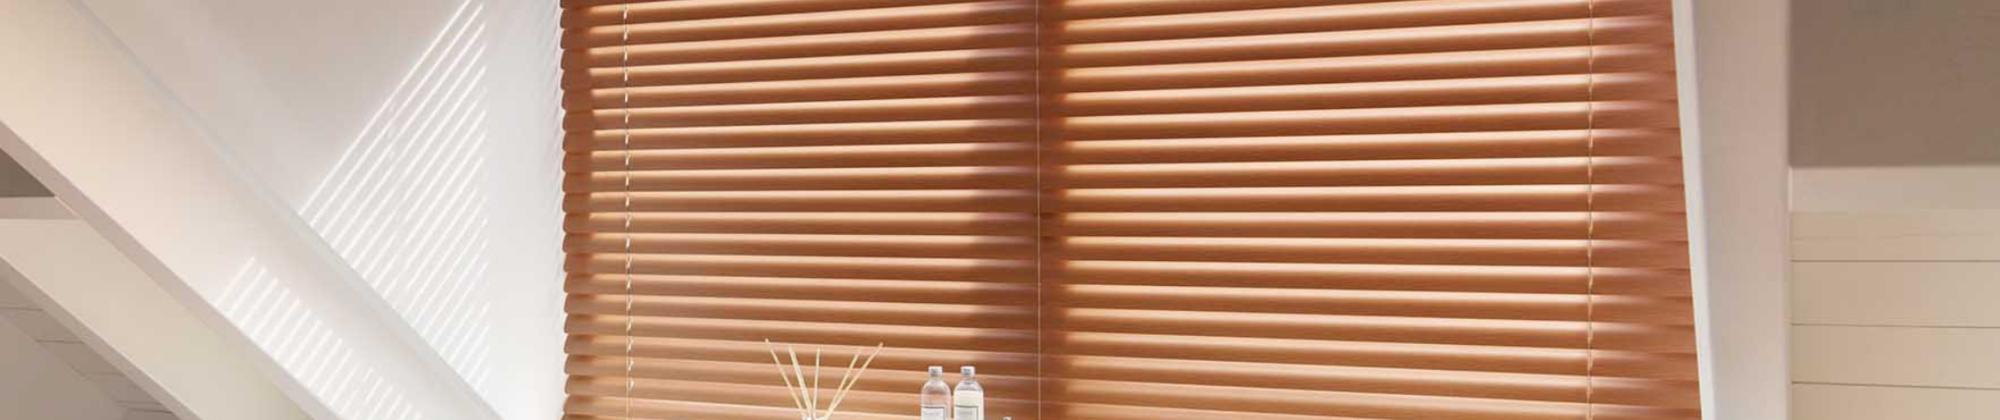 Your Blinds Direct Wooden Blinds